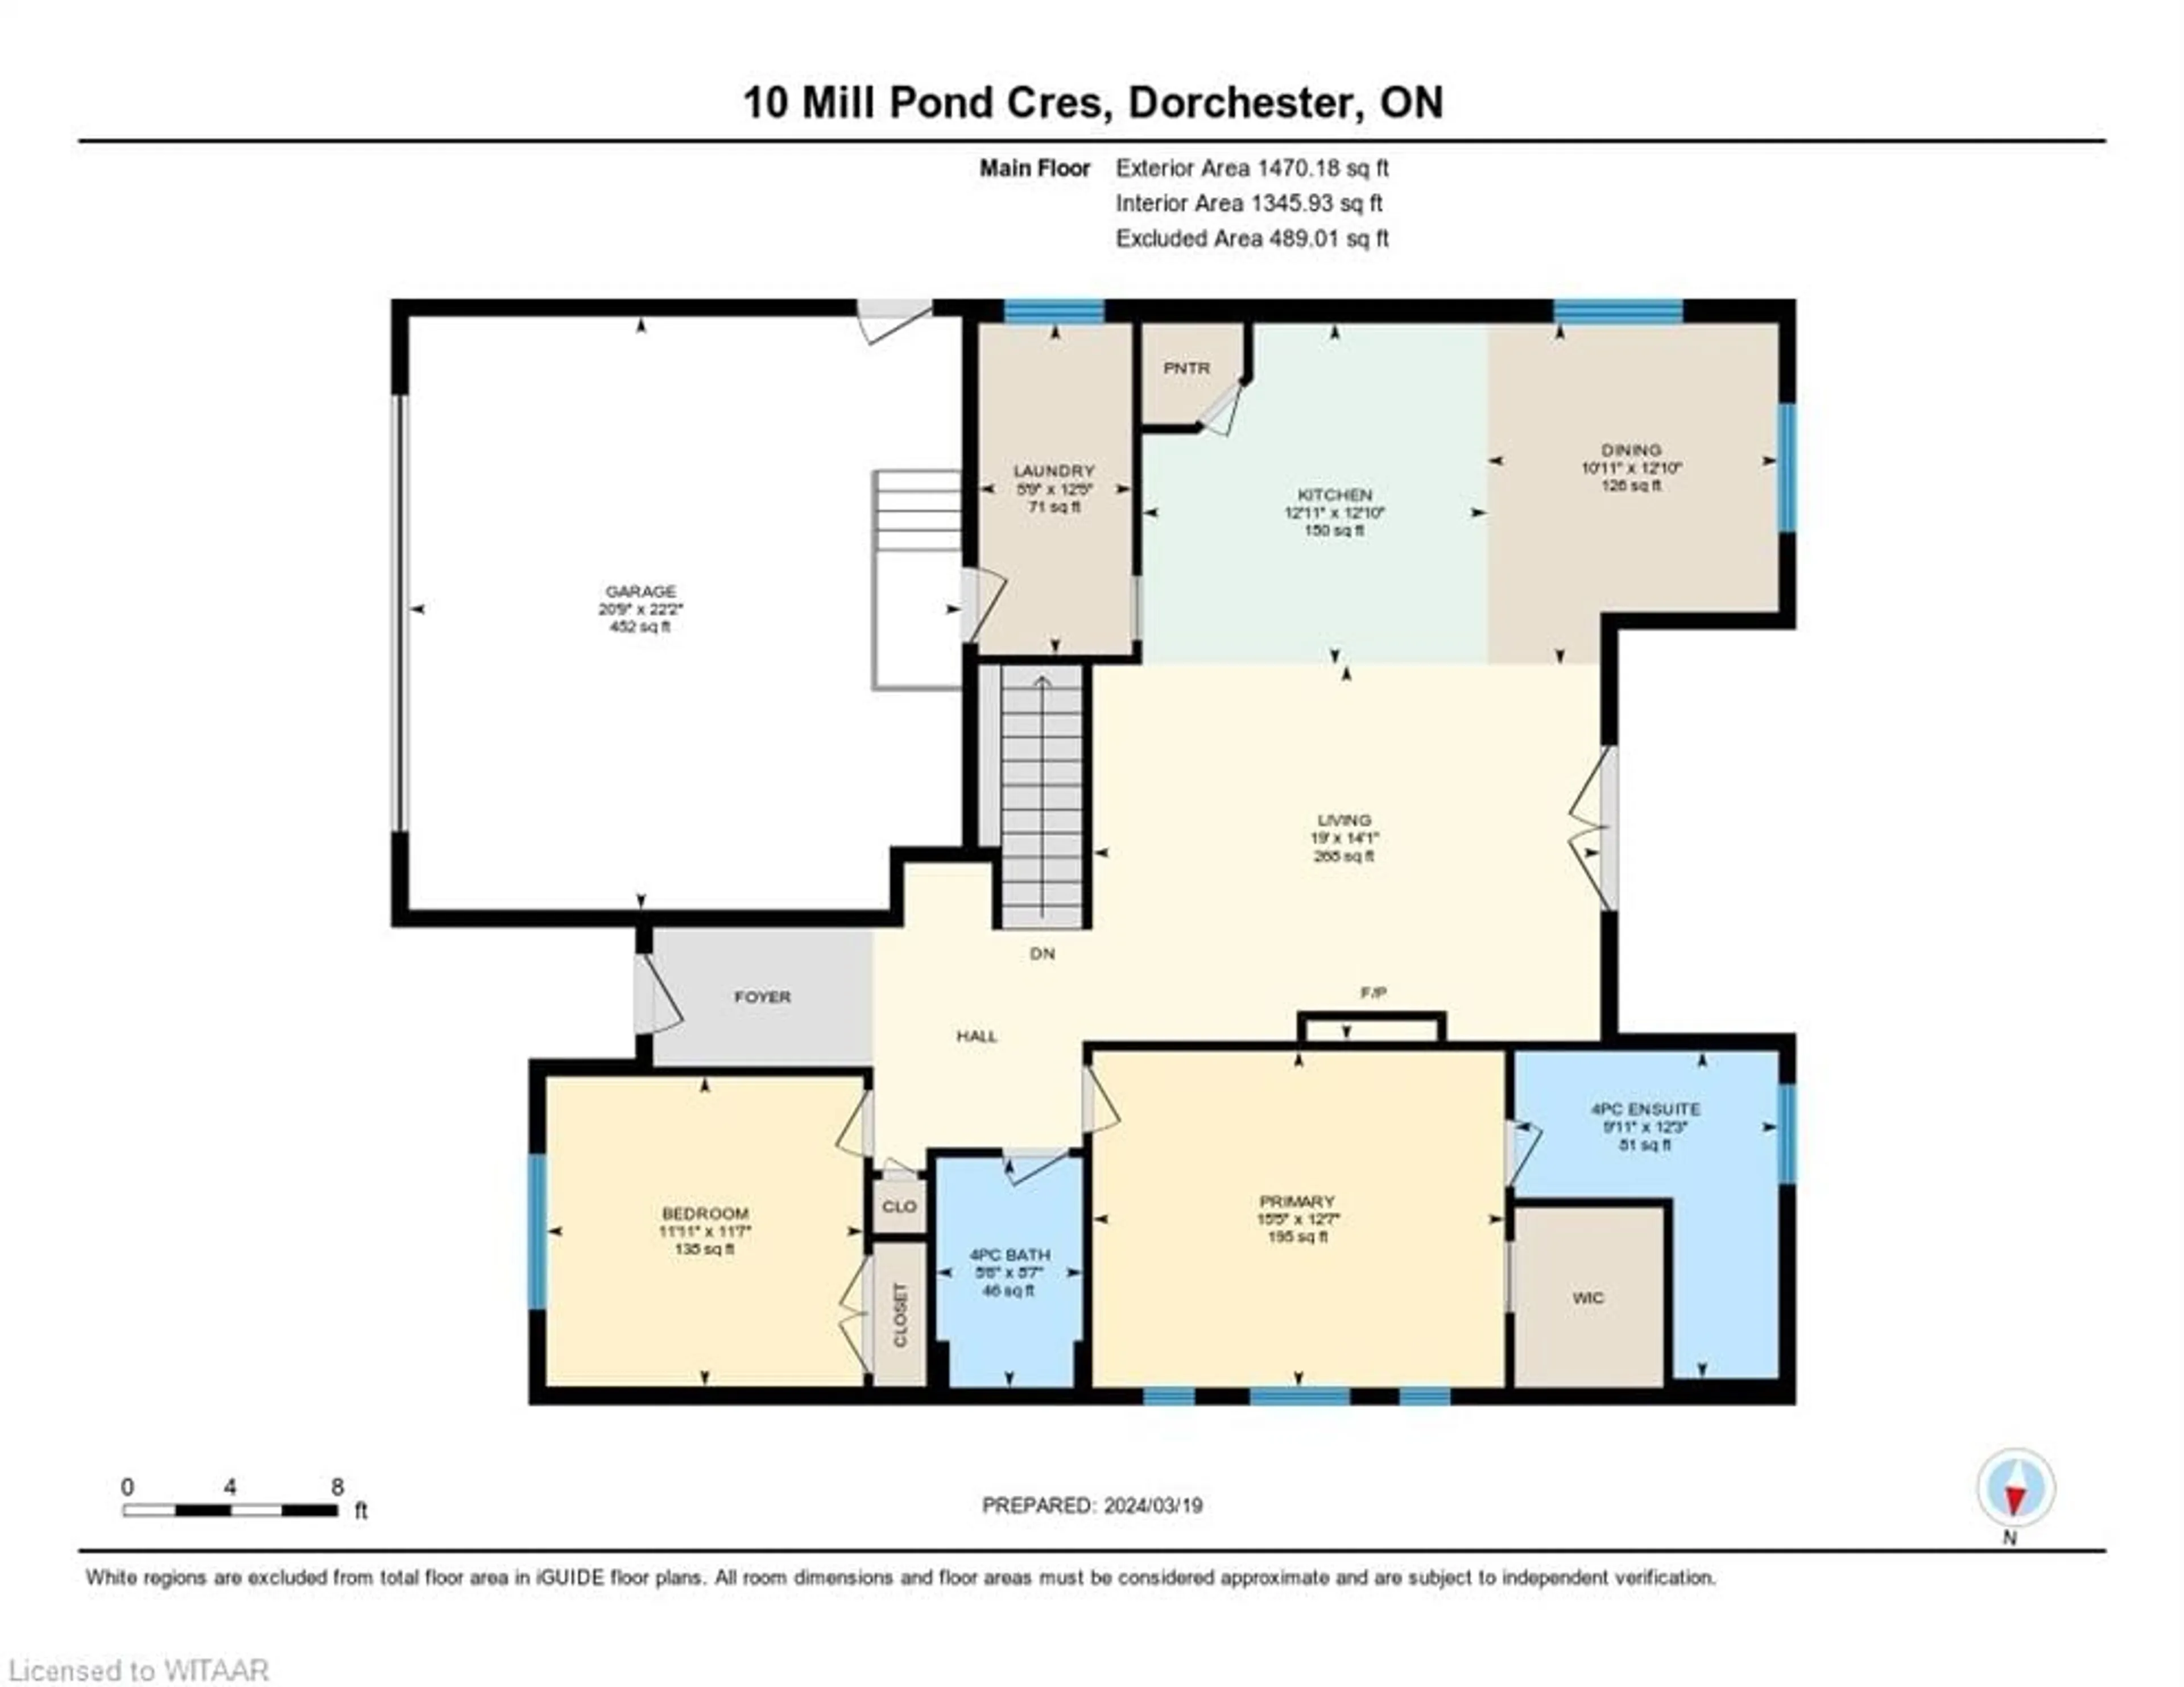 Floor plan for 10 Mill Pond Cres, Dorchester Ontario N0L 1G2